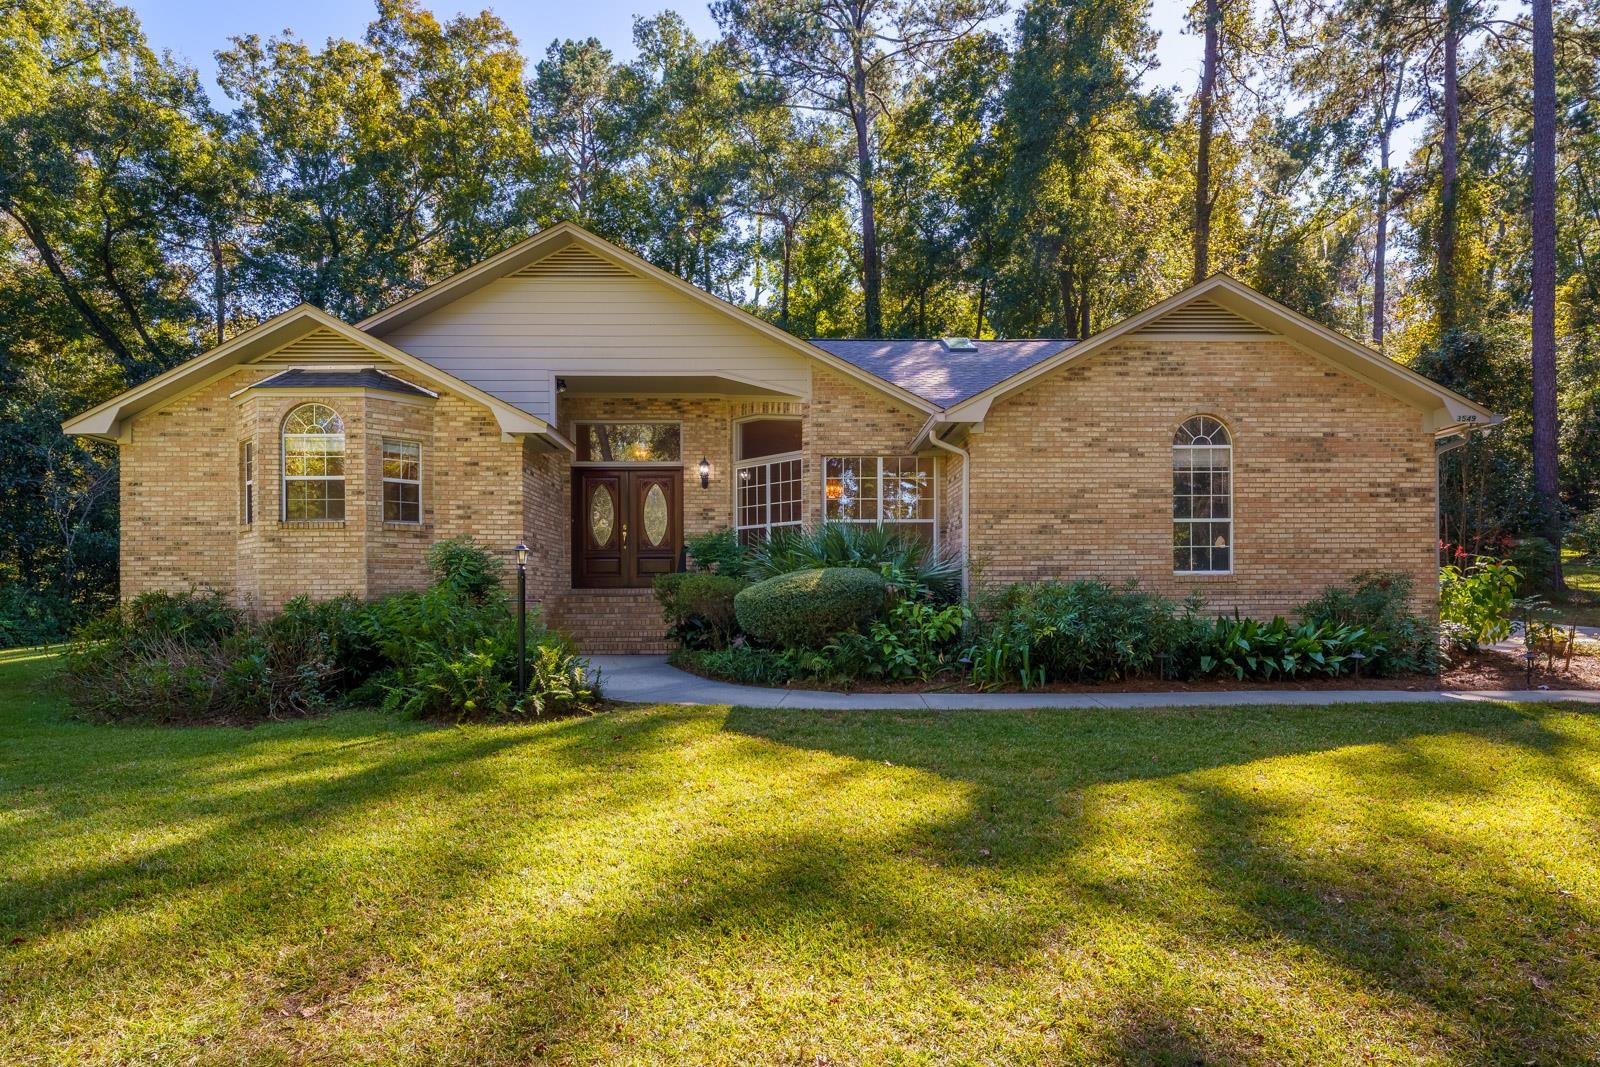 3549 Lakeshore Drive,TALLAHASSEE,Florida 32312,3 Bedrooms Bedrooms,2 BathroomsBathrooms,Detached single family,3549 Lakeshore Drive,365688